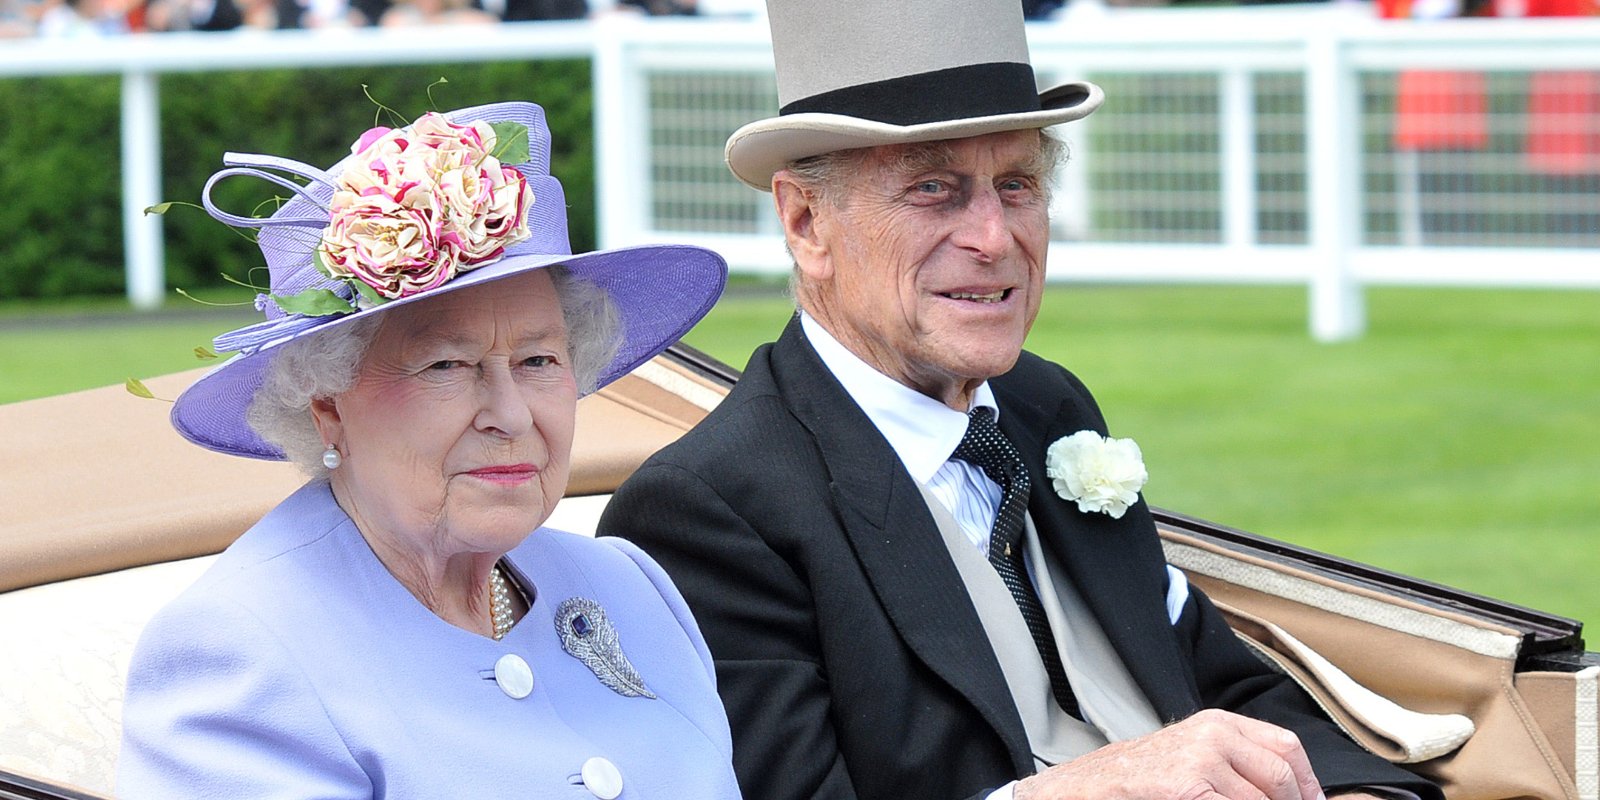 Queen Elizabeth and Prince Philip attend Royal Ascot Ladies Day on June 17, 2010 in Ascot, England. Their deaths were 17 months apart.